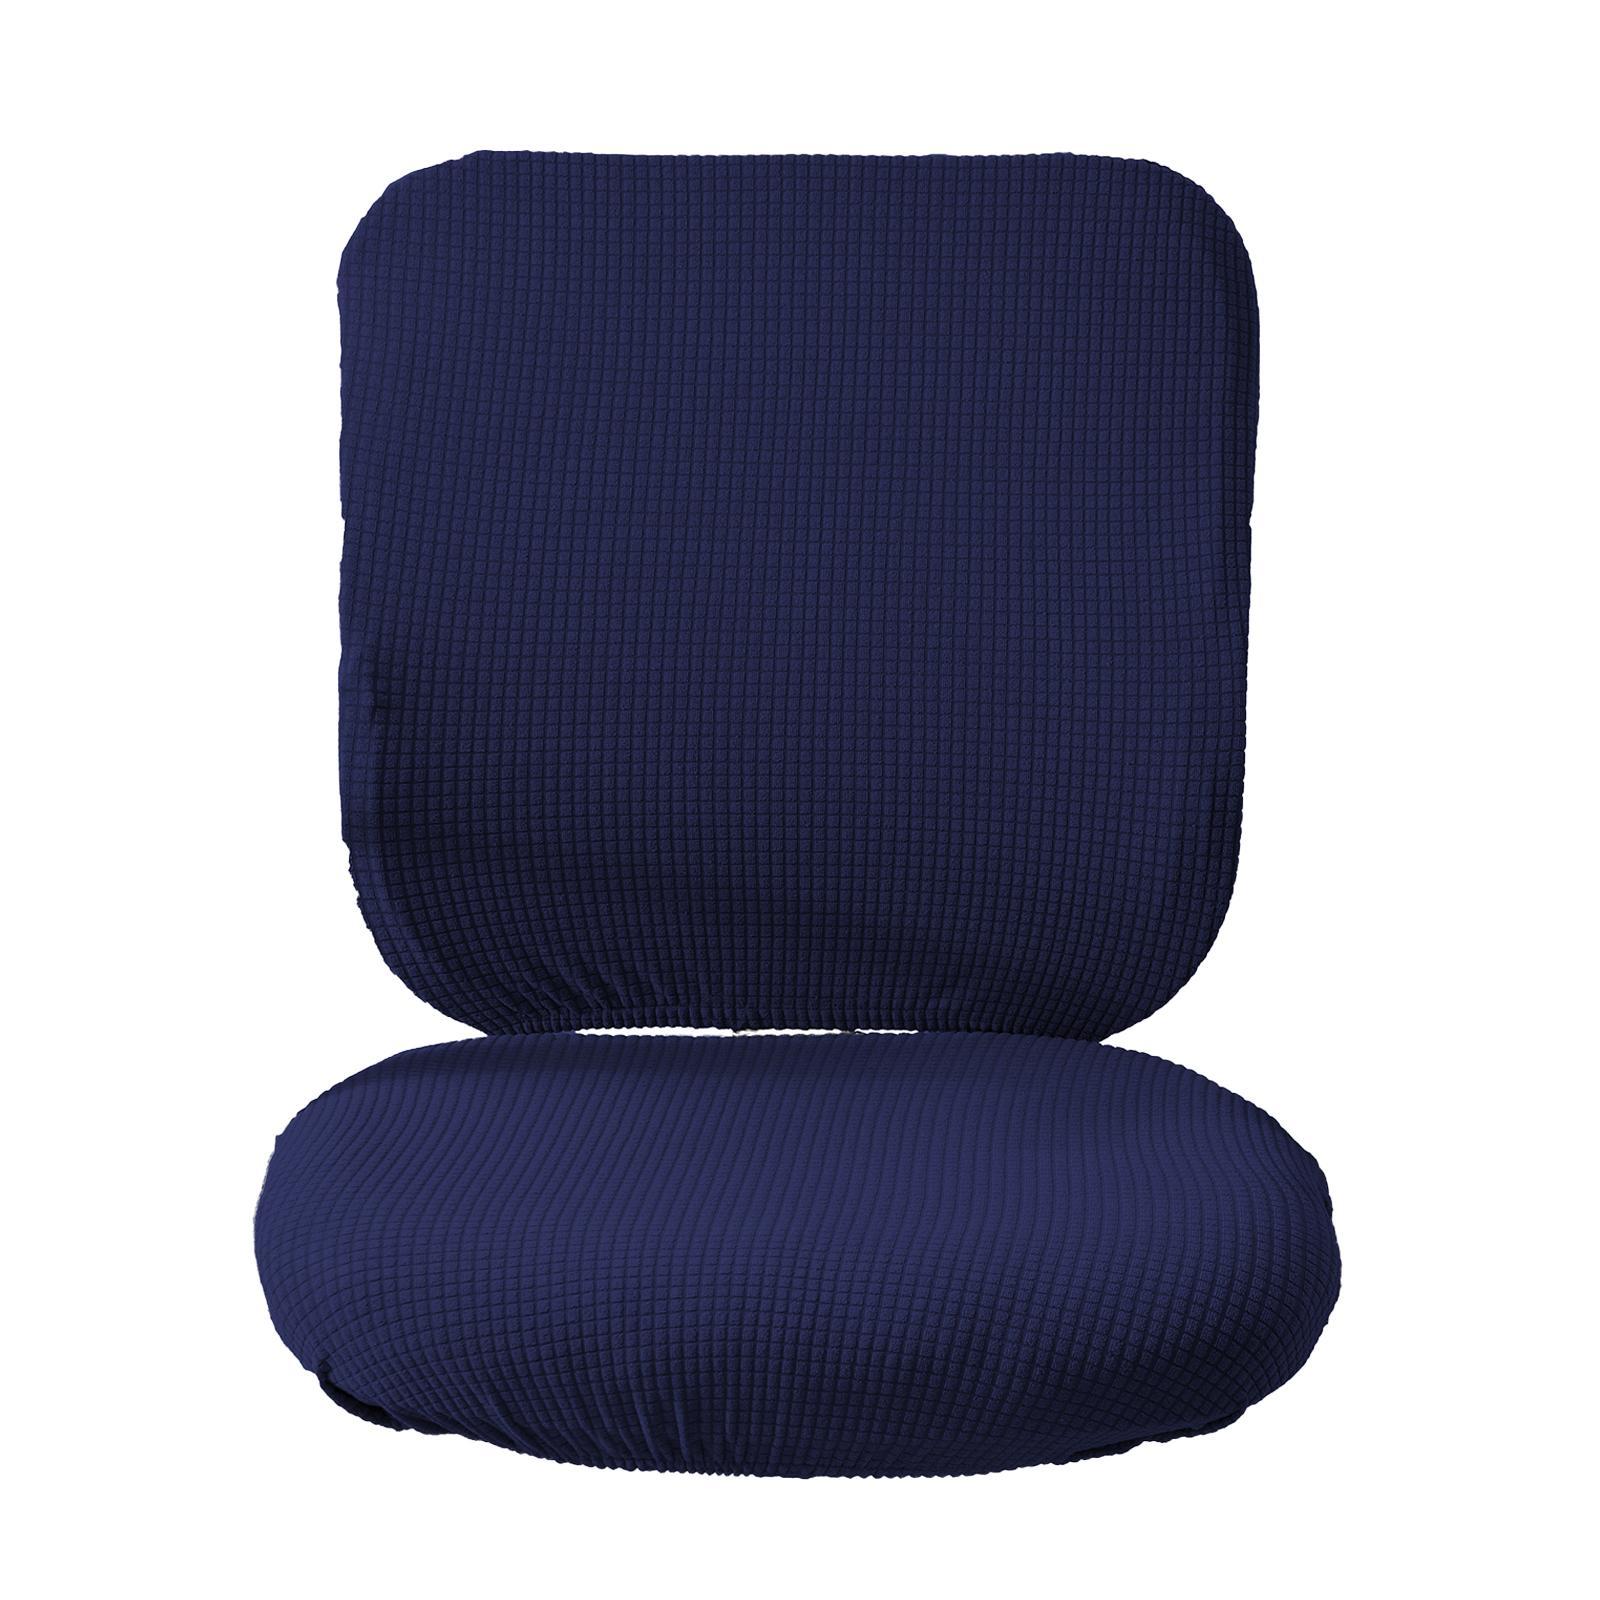 Hình ảnh Computer Chair Cover Swivel Chair Cover for Rotating Chair